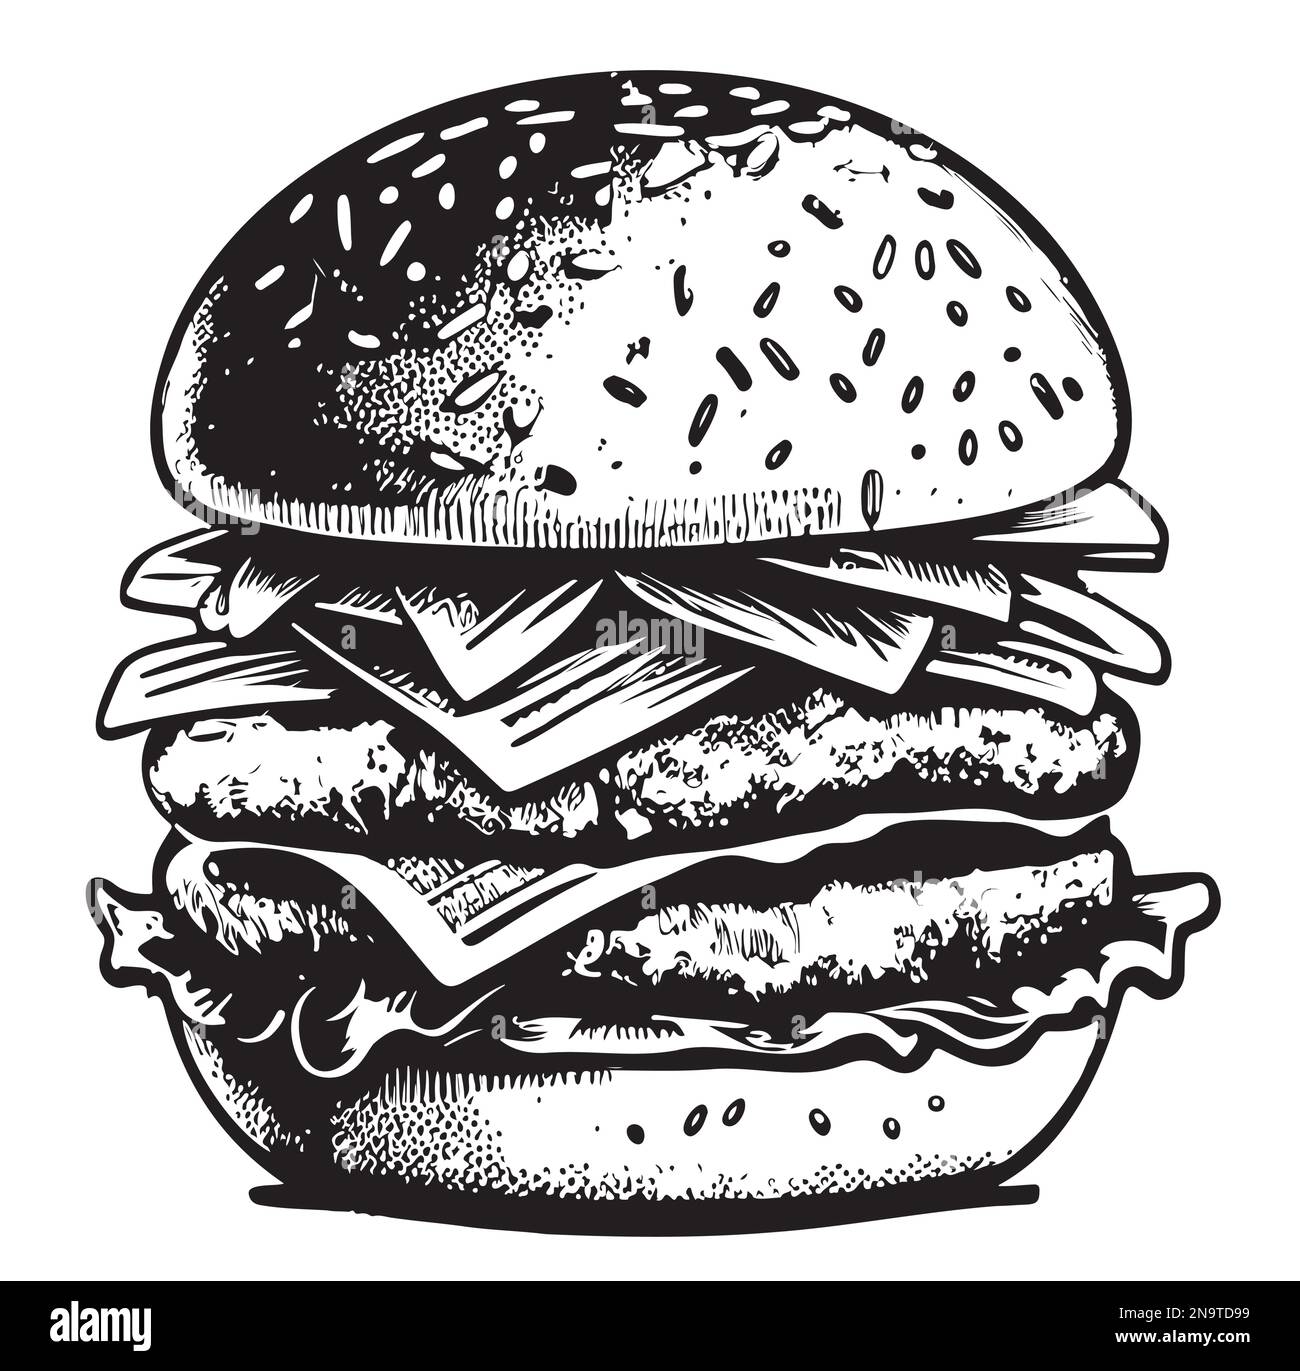 eating burger clipart black and white